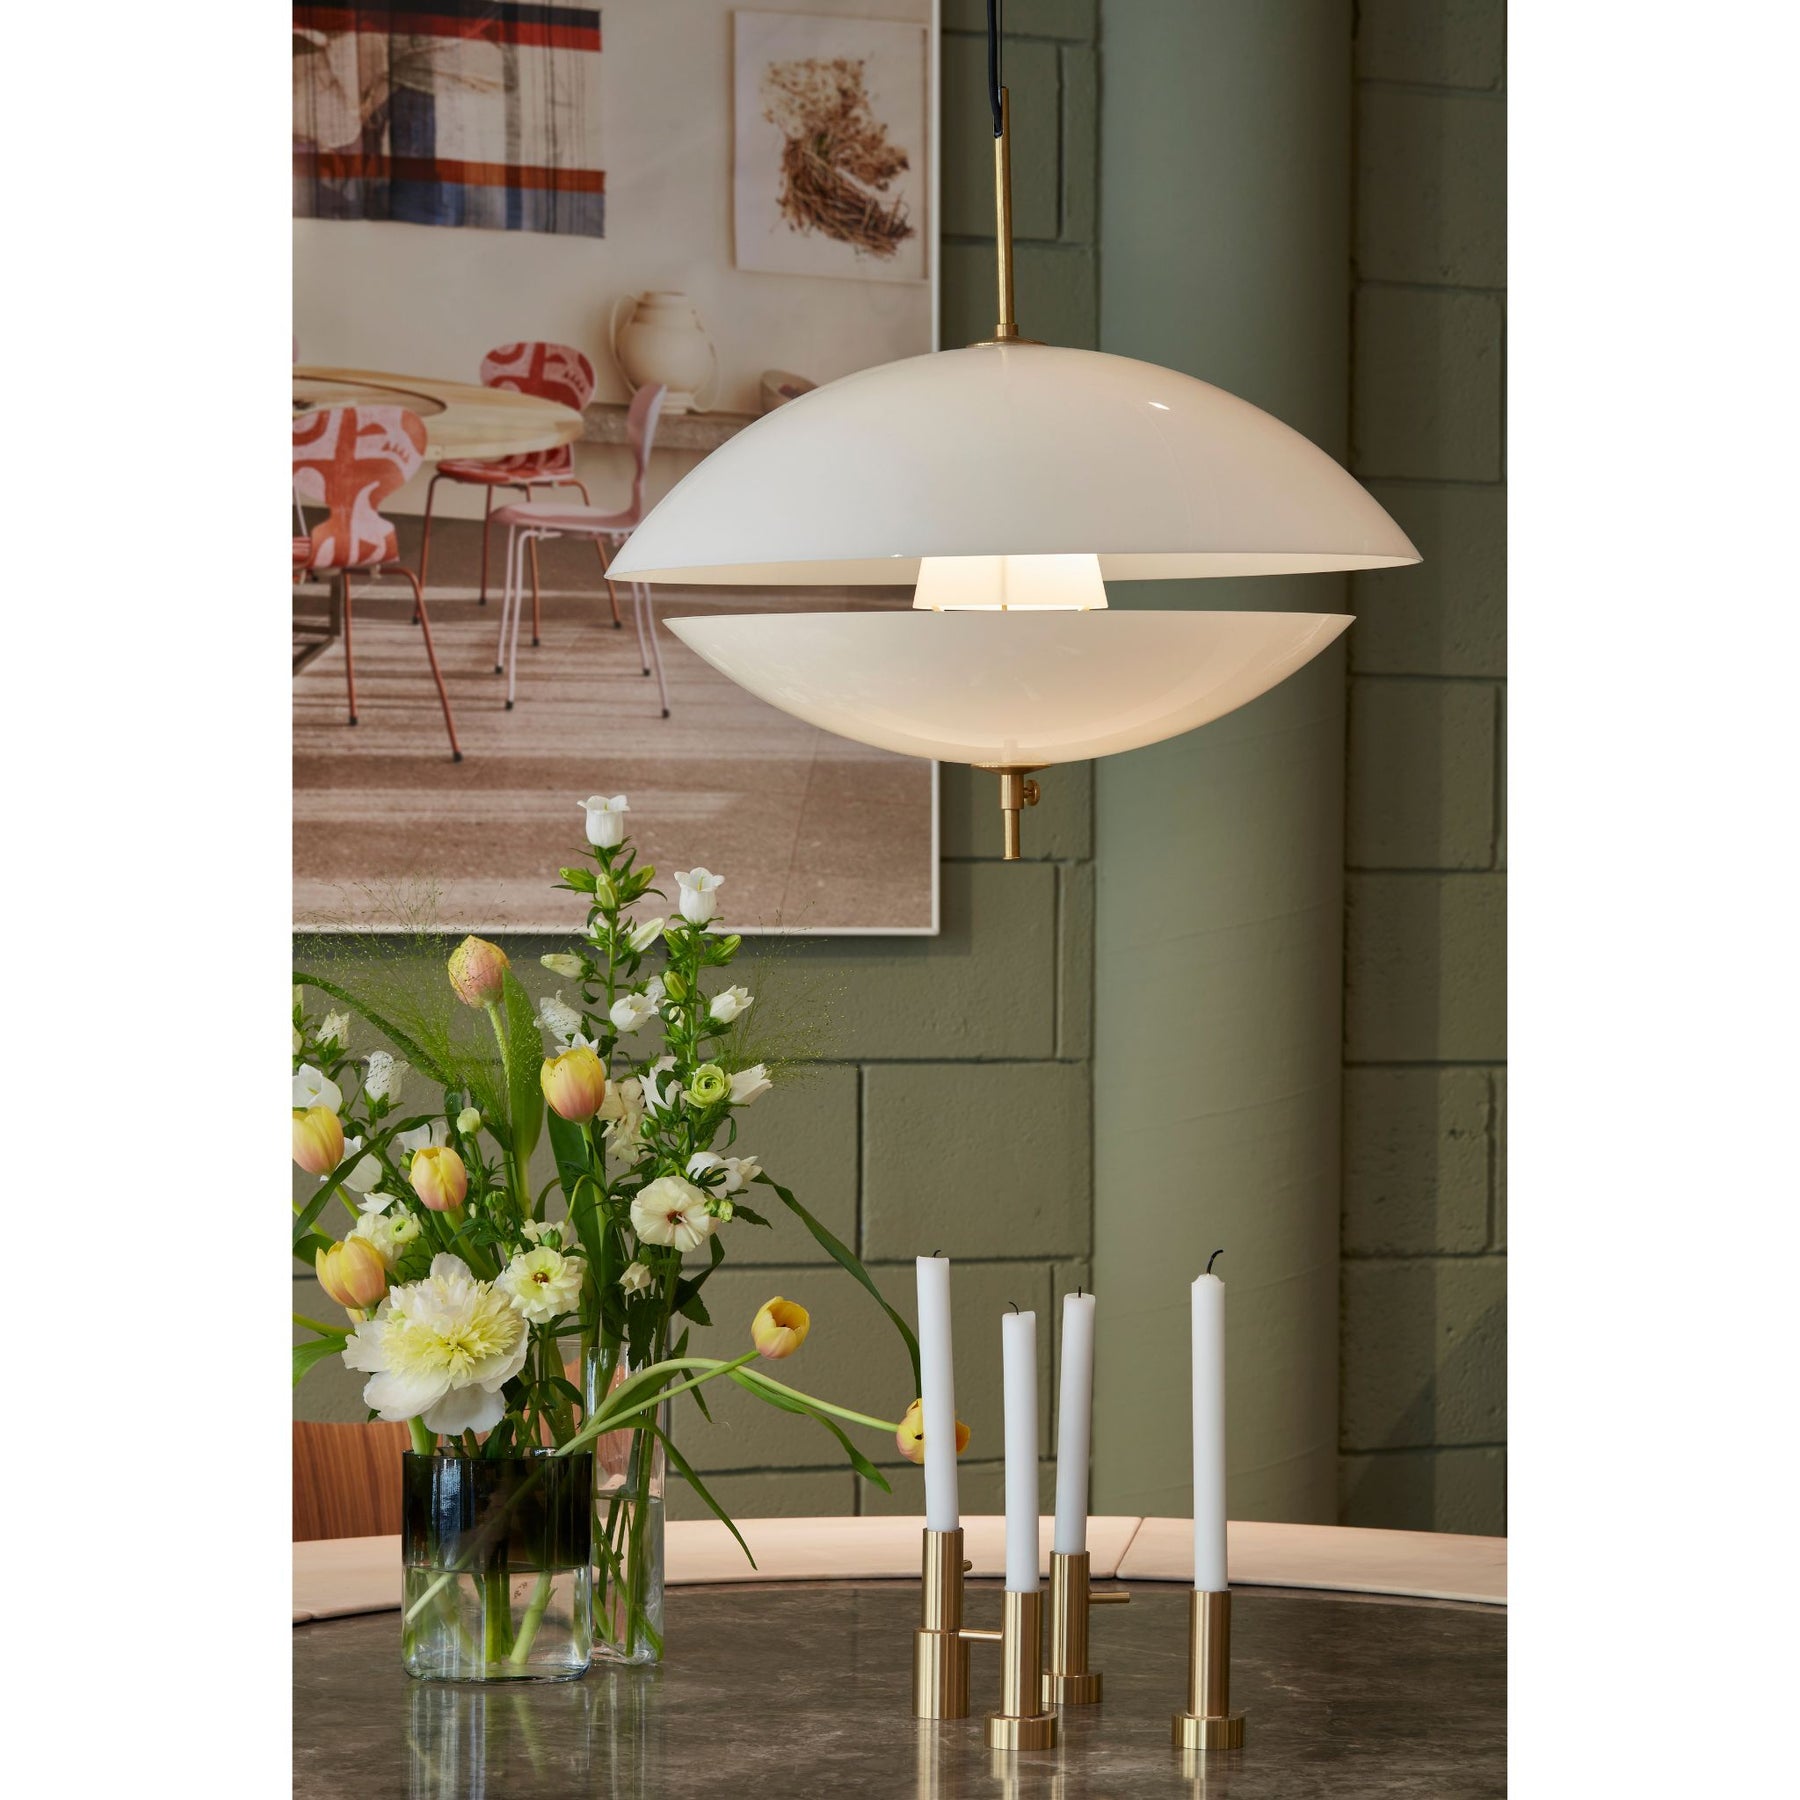 Fritz Hansen Clam Pendant Partially Open over Marble Table with Flowers and Candles